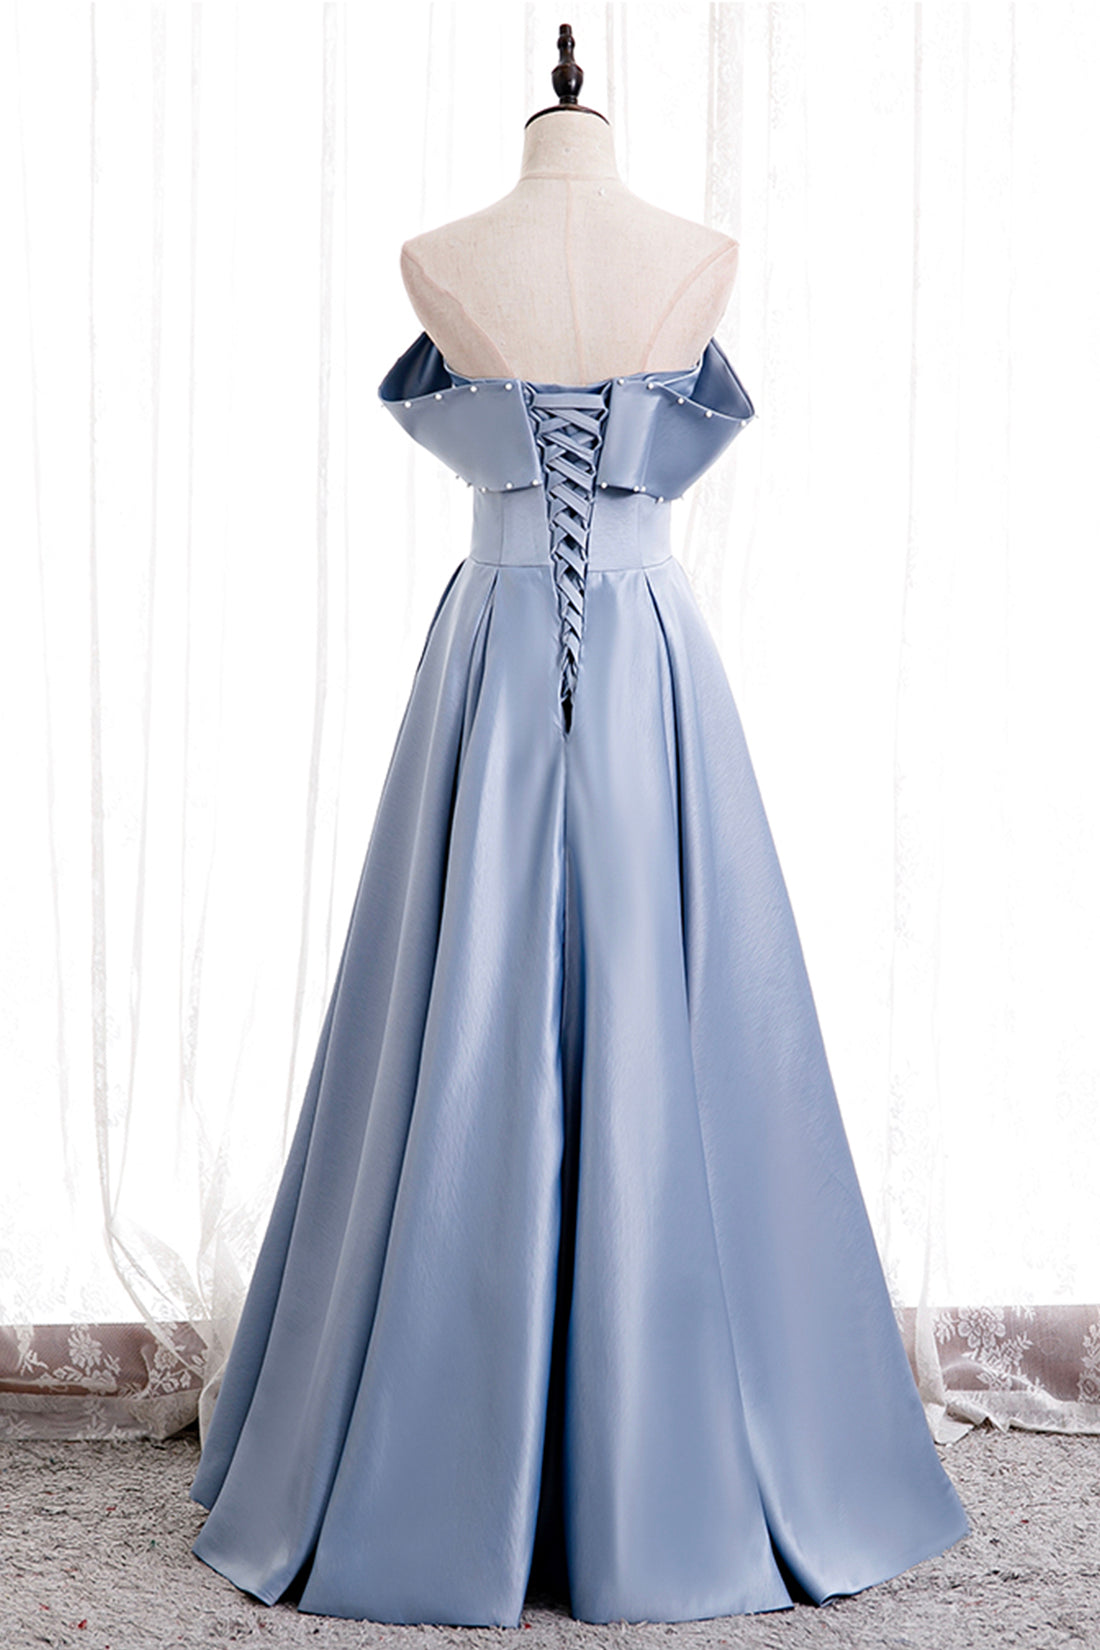 Blue Satin Long Prom Dress with Pearls, Blue A-Line Strapless Party Dress